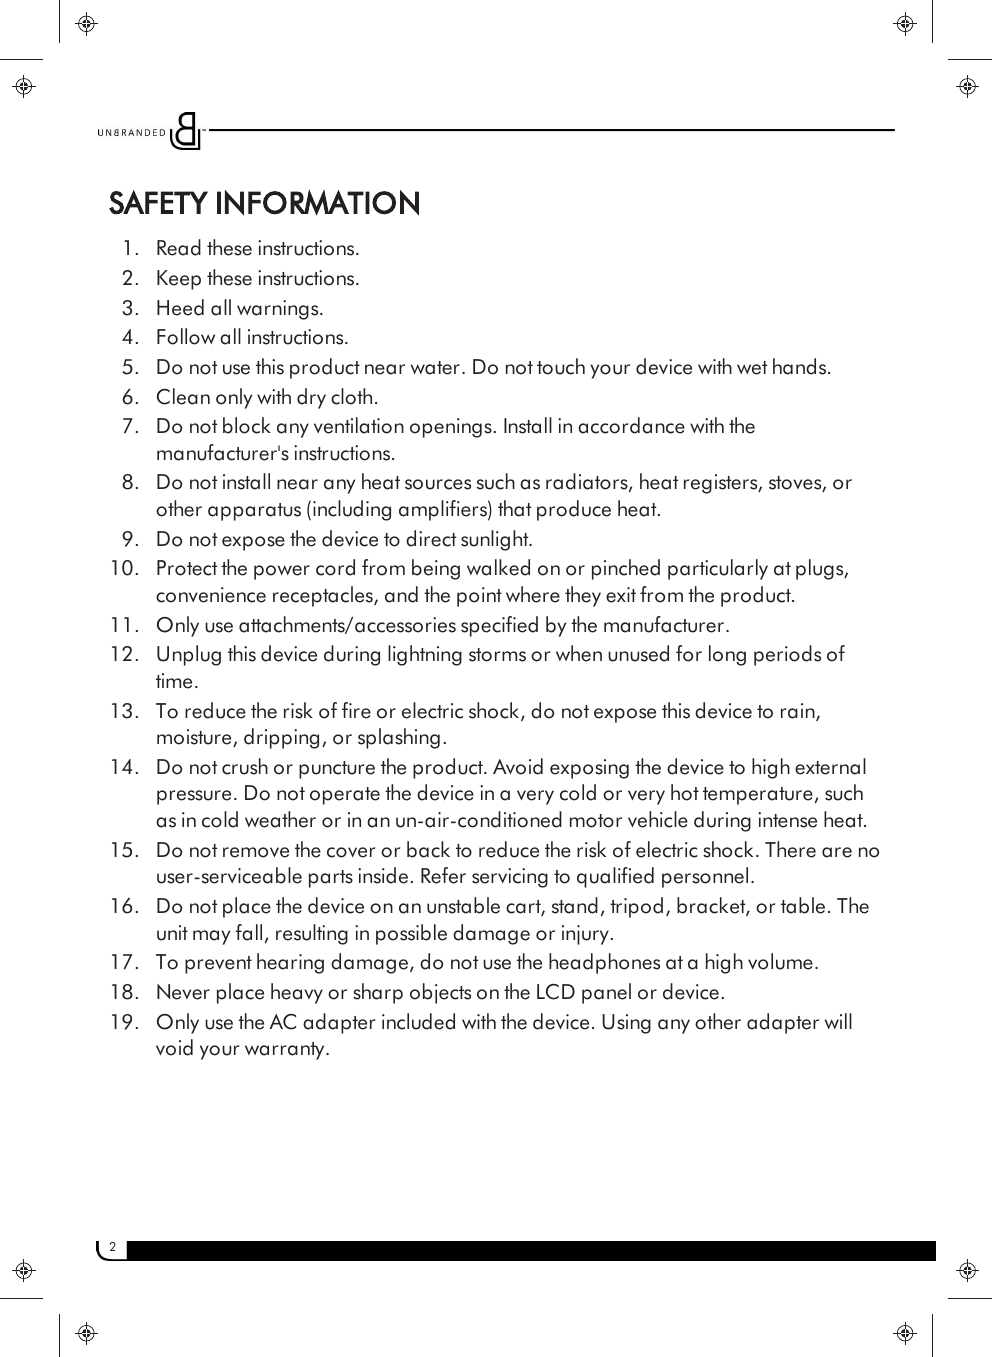 2SAFETY INFORMATION1. Read these instructions.2. Keep these instructions.3. Heed all warnings.4. Follow all instructions.5. Do not use this product near water. Do not touch your device with wet hands.6. Clean only with dry cloth.7. Do not block any ventilation openings. Install in accordance with themanufacturer&apos;s instructions.8. Do not install near any heat sources such as radiators, heat registers, stoves, orother apparatus (including amplifiers) that produce heat.9. Do not expose the device to direct sunlight.10. Protect the power cord from being walked on or pinched particularly at plugs,convenience receptacles, and the point where they exit from the product.11. Only use attachments/accessories specified by the manufacturer.12. Unplug this device during lightning storms or when unused for long periods oftime.13. To reduce the risk of fire or electric shock, do not expose this device to rain,moisture, dripping, or splashing.14. Do not crush or puncture the product. Avoid exposing the device to high externalpressure. Do not operate the device in a very cold or very hot temperature, suchas in cold weather or in an un-air-conditioned motor vehicle during intense heat.15. Do not remove the cover or back to reduce the risk of electric shock. There are nouser-serviceable parts inside. Refer servicing to qualified personnel.16. Do not place the device on an unstable cart, stand, tripod, bracket, or table. Theunit may fall, resulting in possible damage or injury.17. To prevent hearing damage, do not use the headphones at a high volume.18. Never place heavy or sharp objects on the LCD panel or device.19. Only use the AC adapter included with the device. Using any other adapter willvoid your warranty.